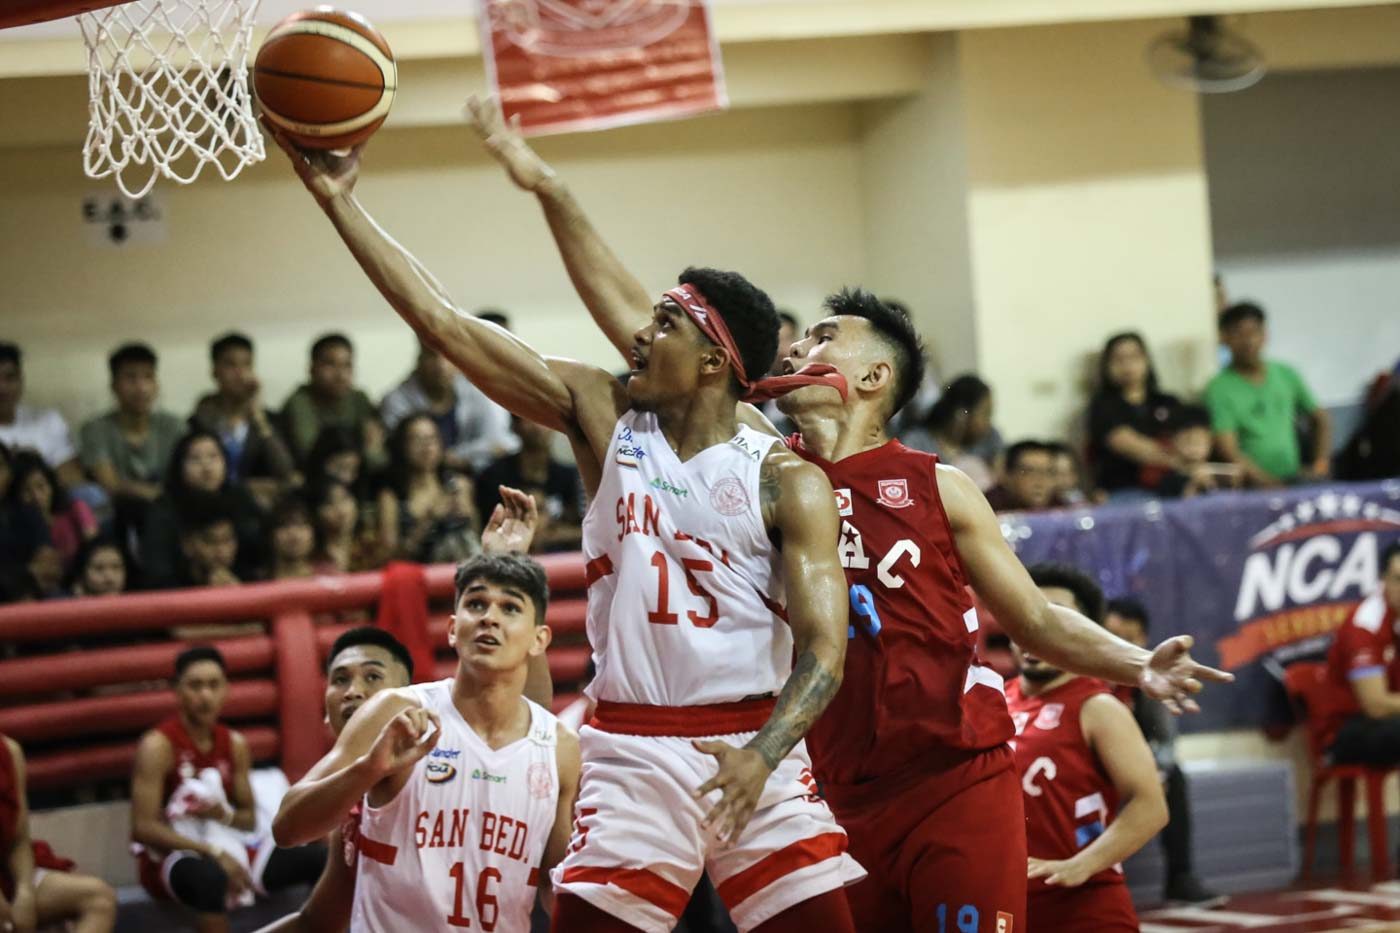 San Beda routs EAC for 3rd straight win